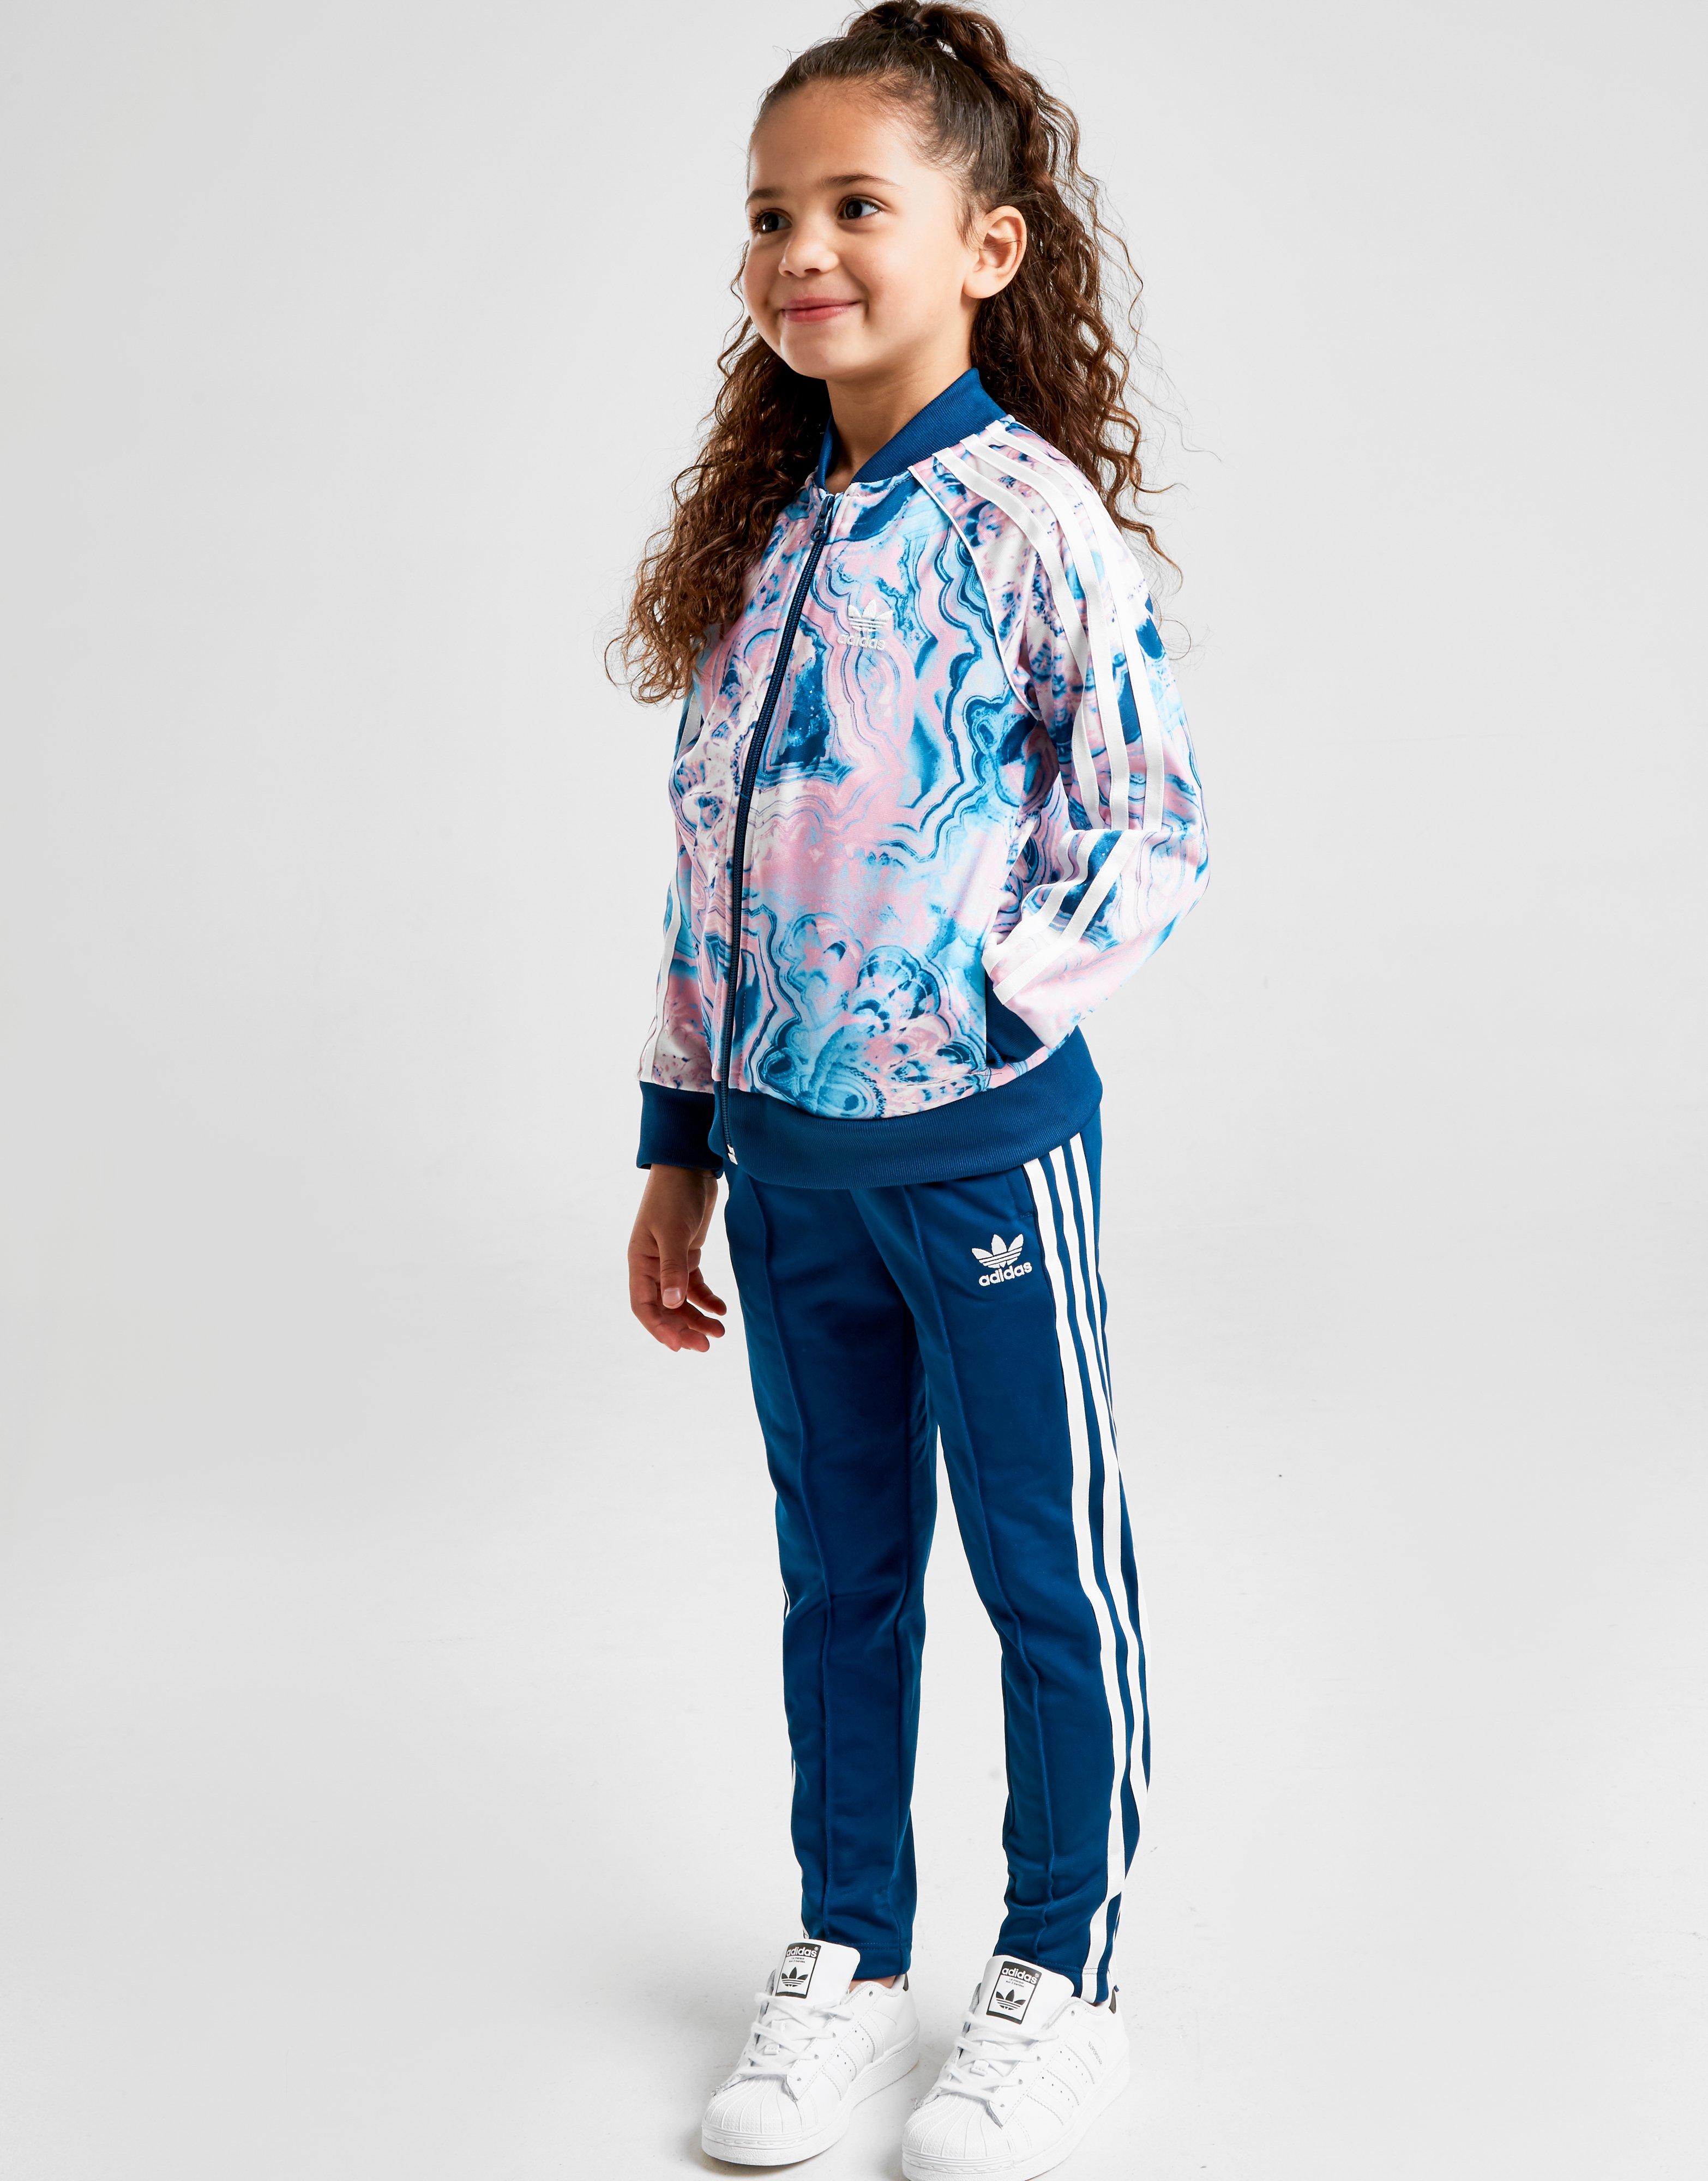 addidas track suit for girls